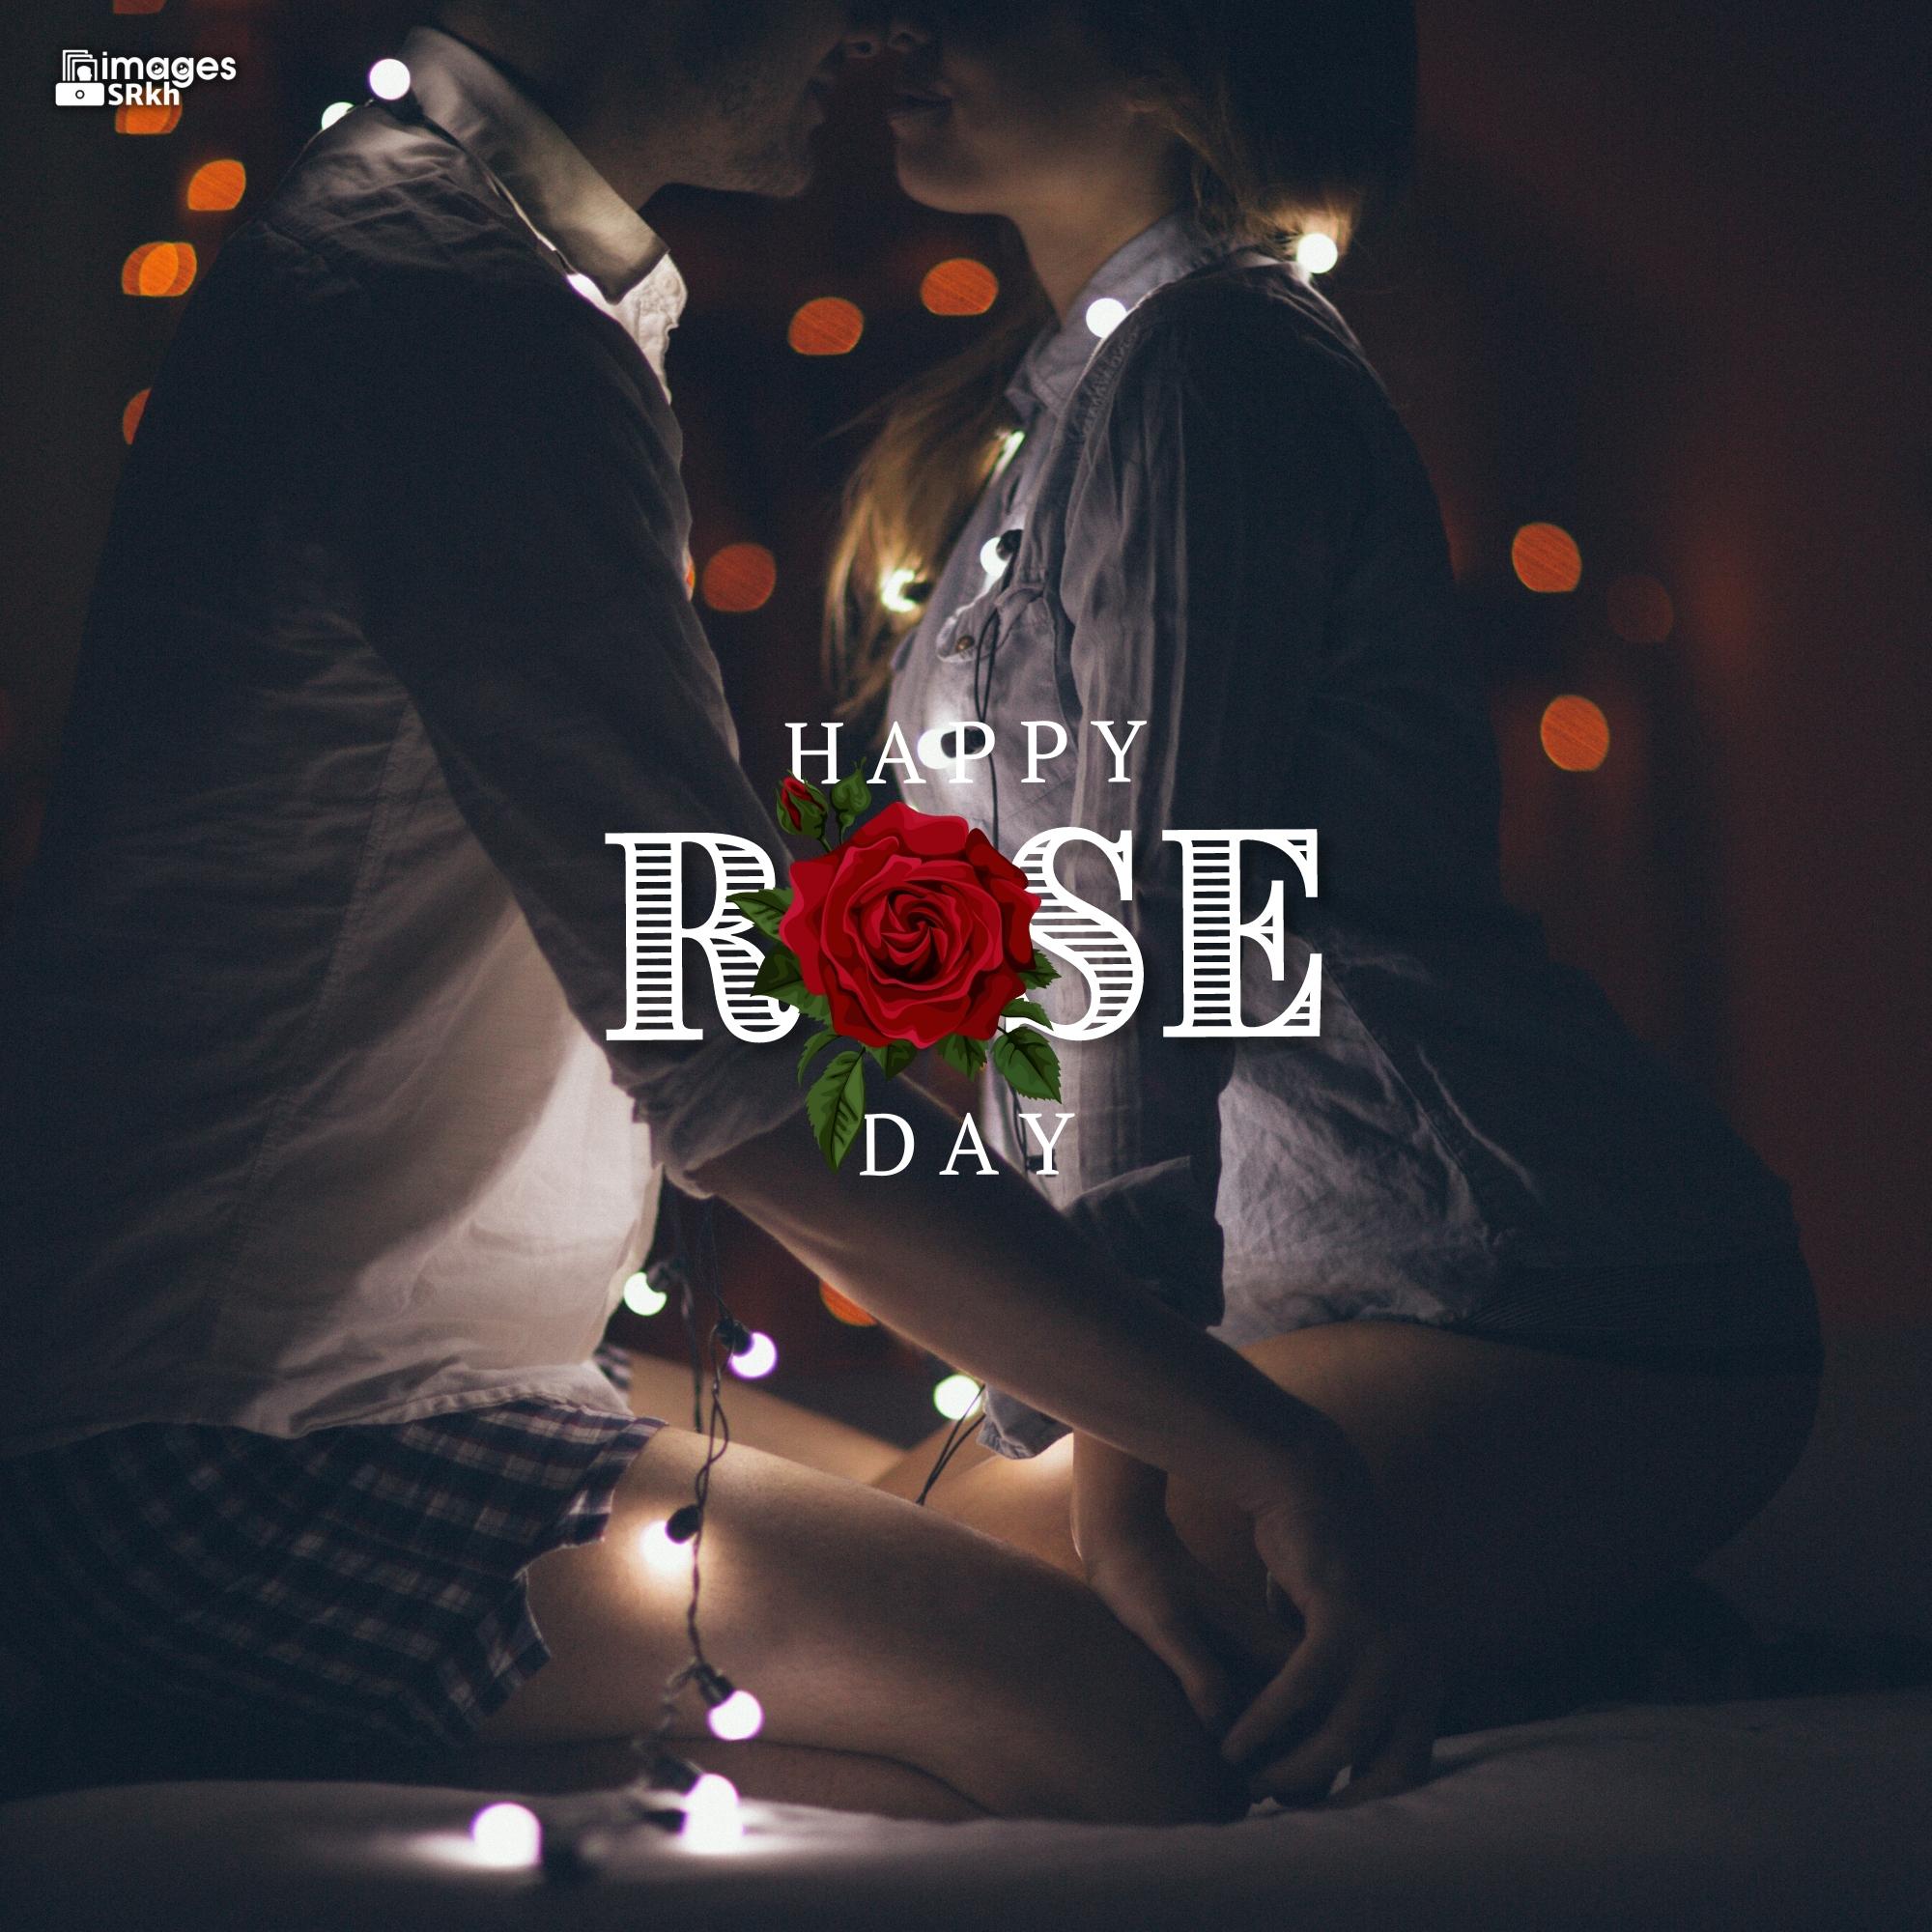 Romantic Rose Day Images Hd Download (22)